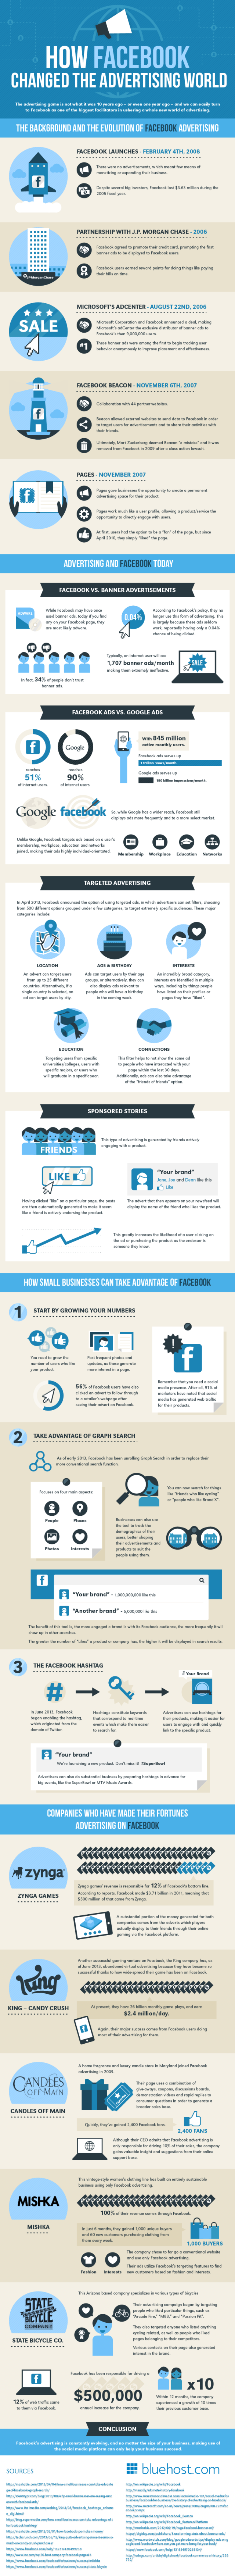 how-facebook-changed-the-advertising-world-infographic-1